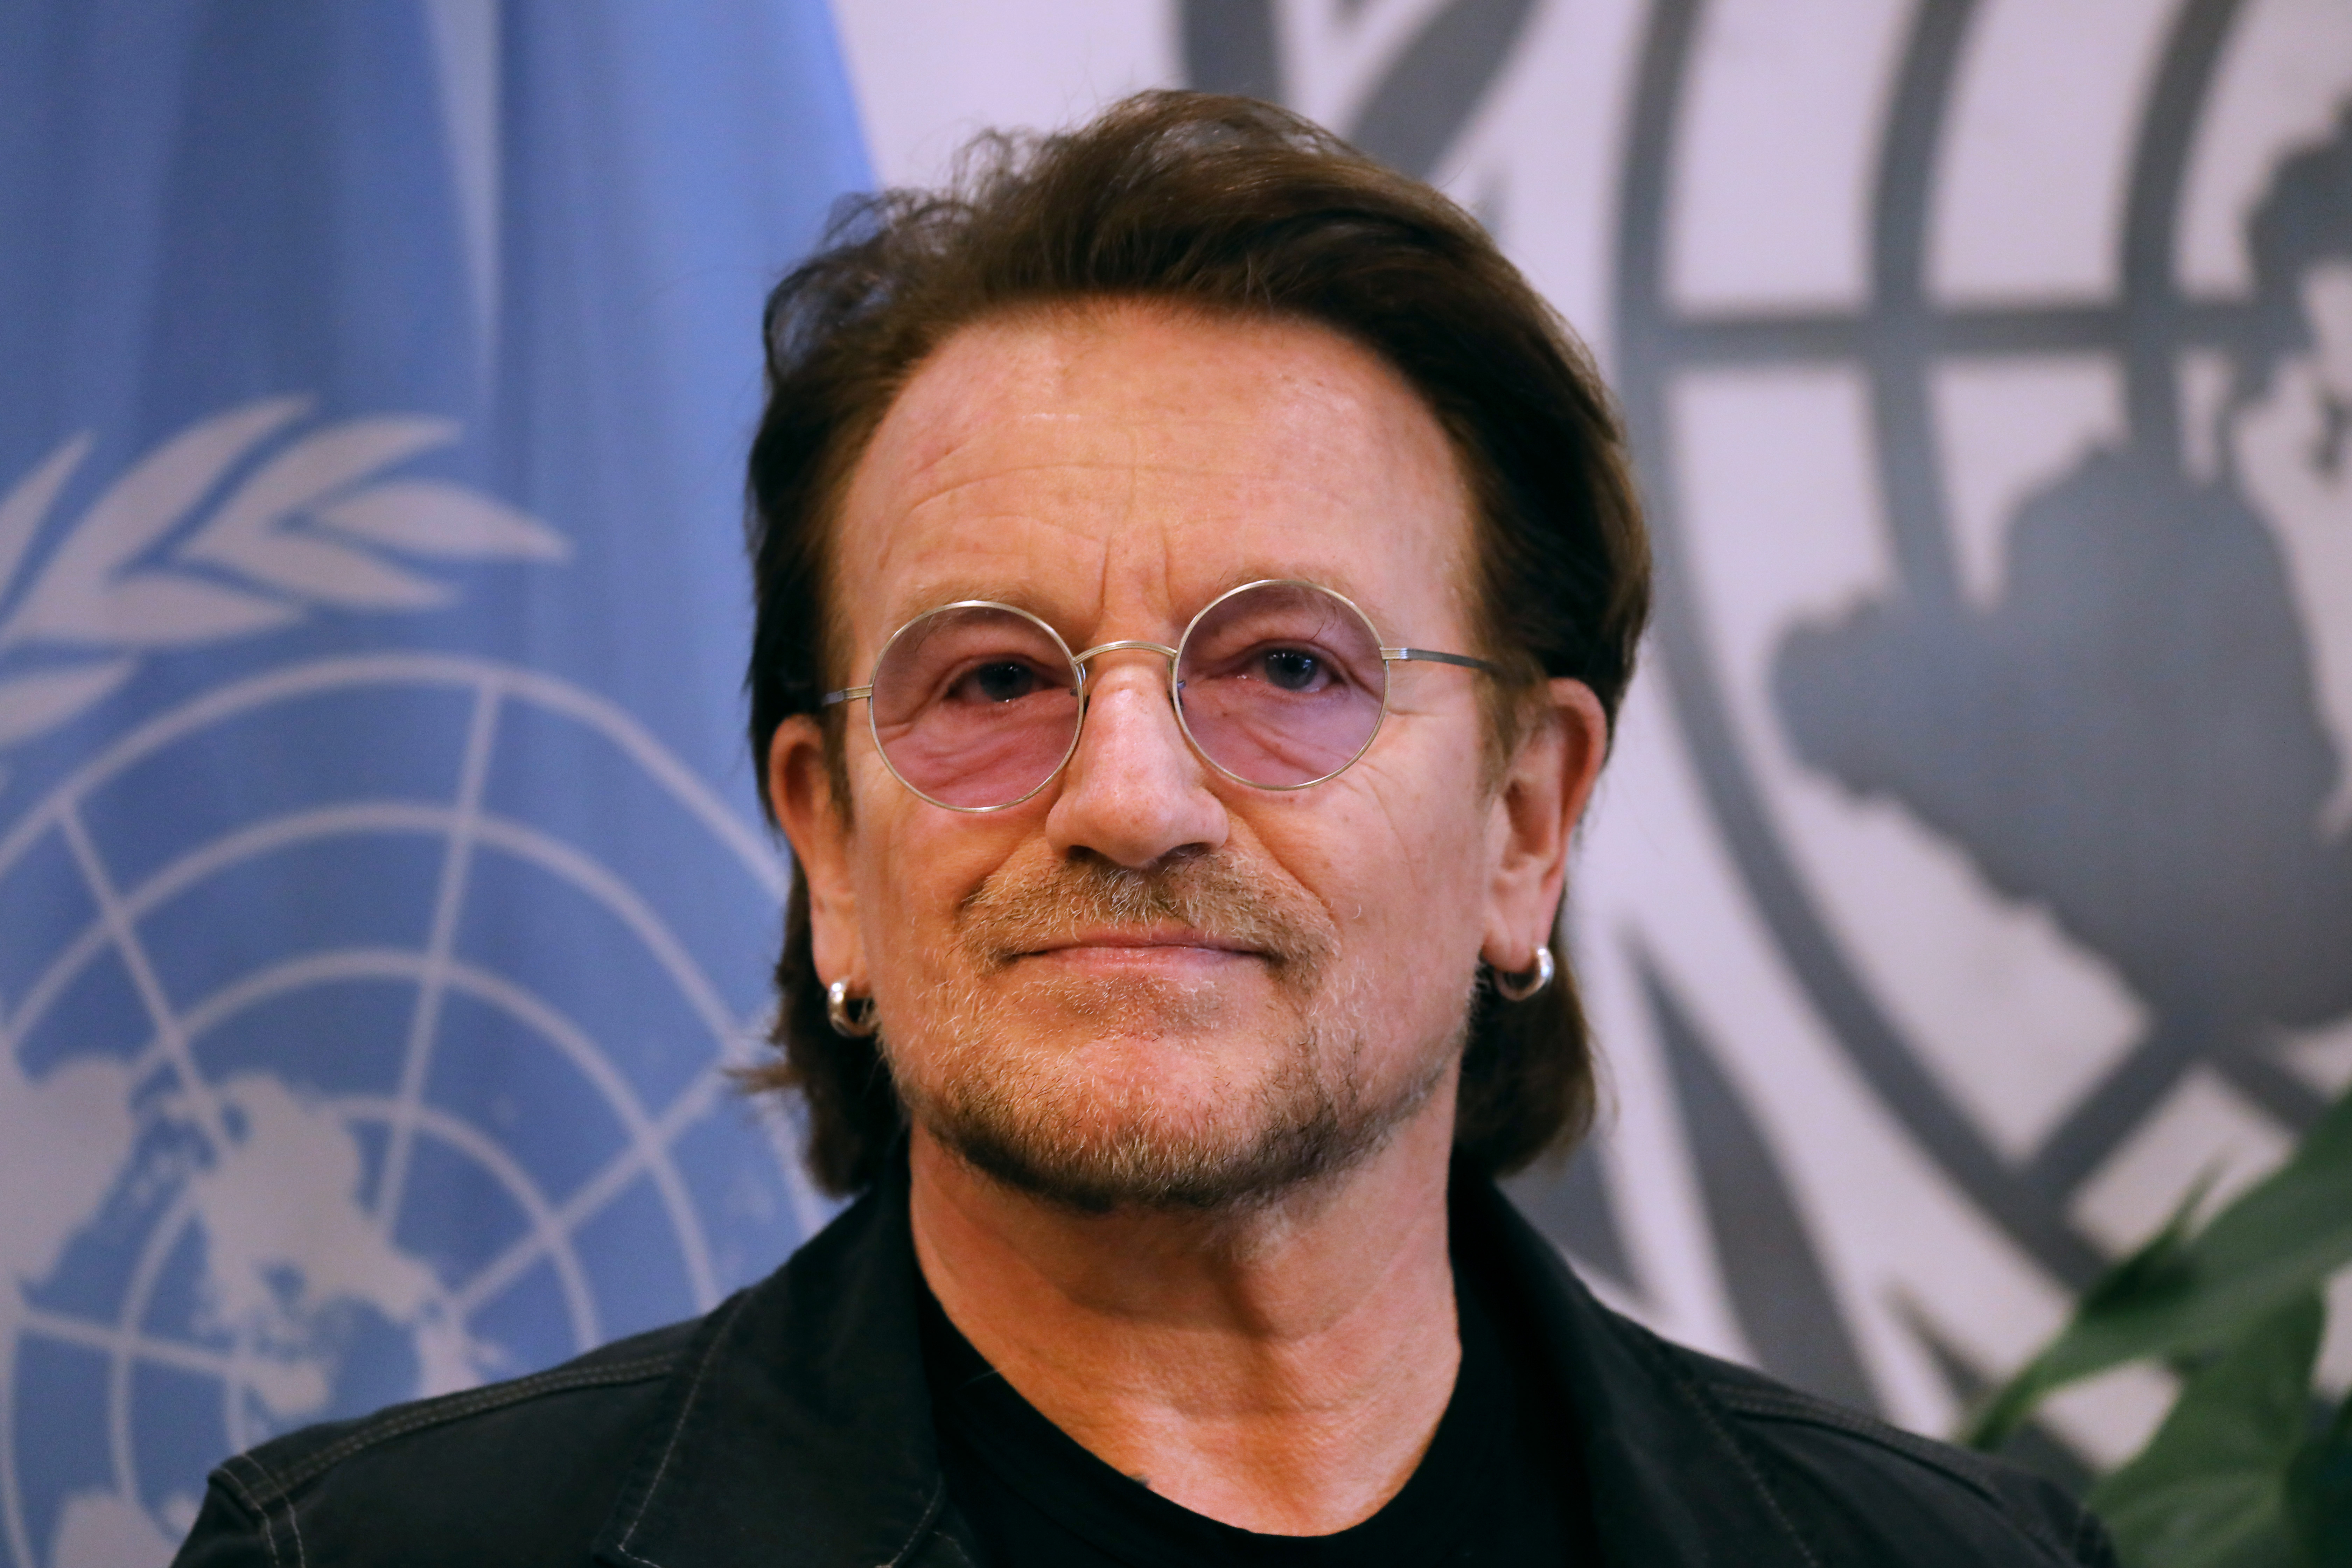 Bono meets with António Guterres, the Secretary-General of the United Nations, on February 11, 2020 in New York City. The lead singer of U2 recently said he dislikes the band name and the sound of his own voice.